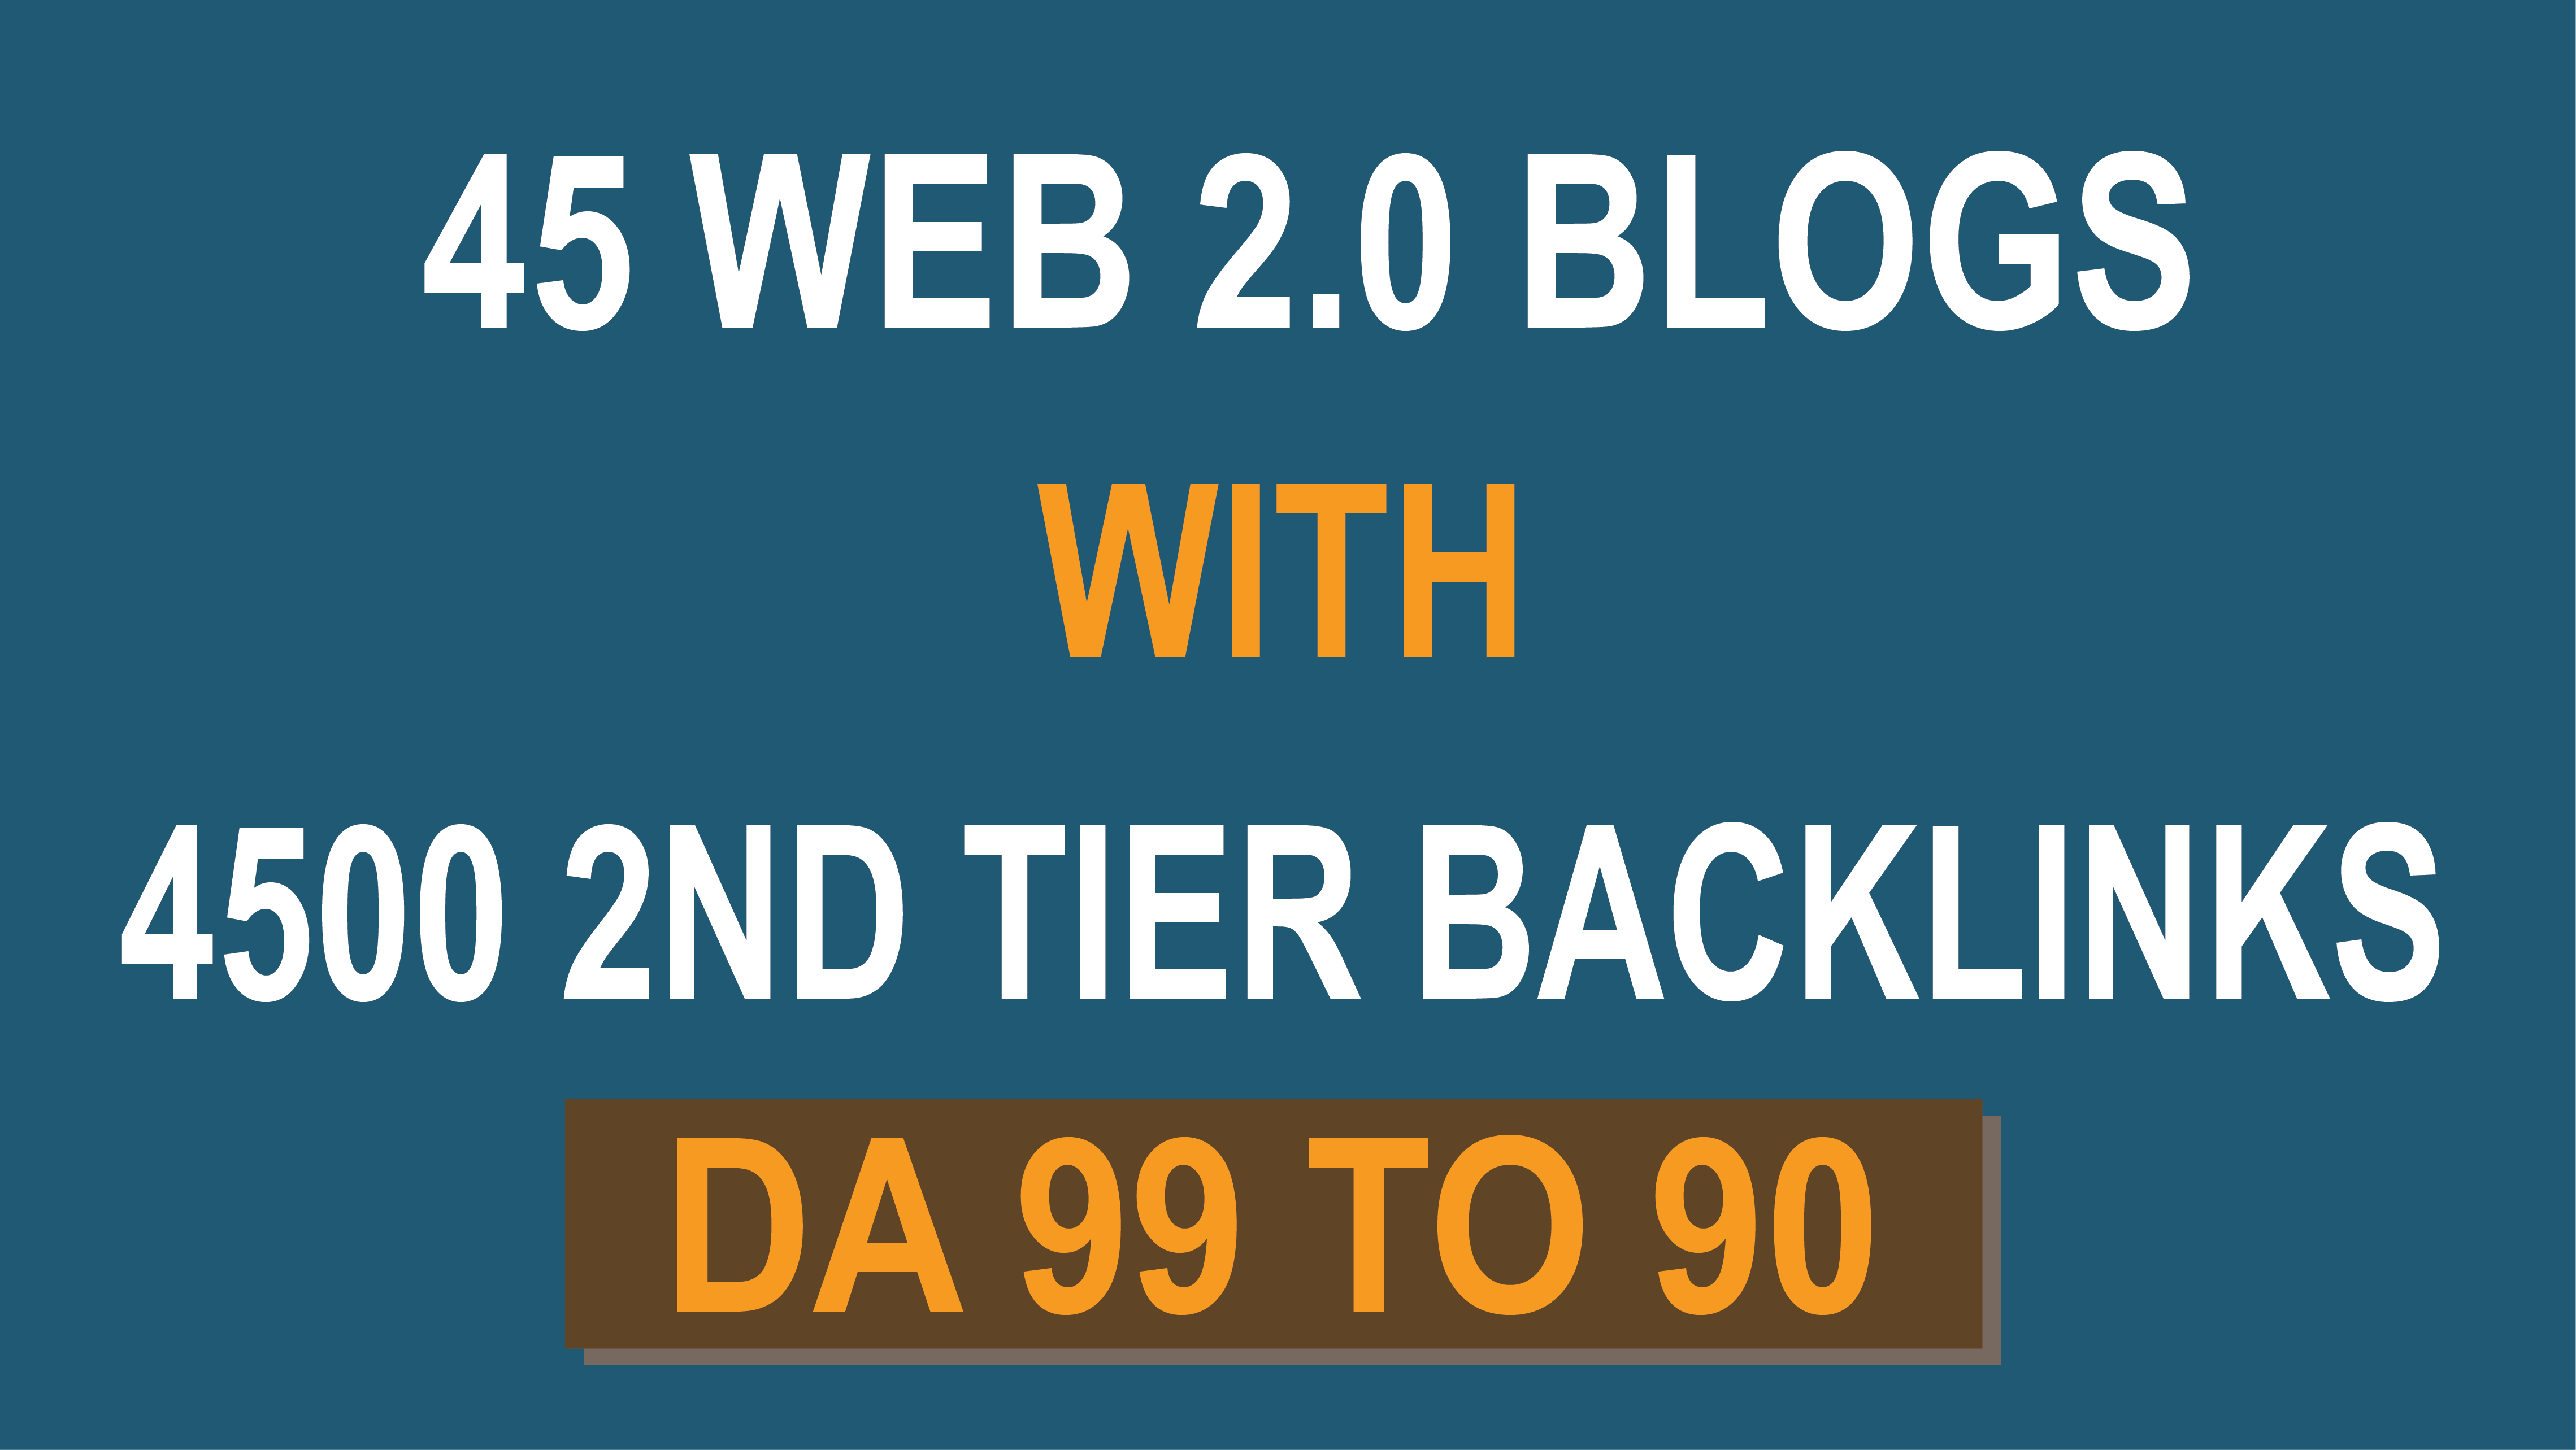 We Build 45 Powerful Web 2.0 Blogs With 4500 2nd Tier Dofollow Backlinks